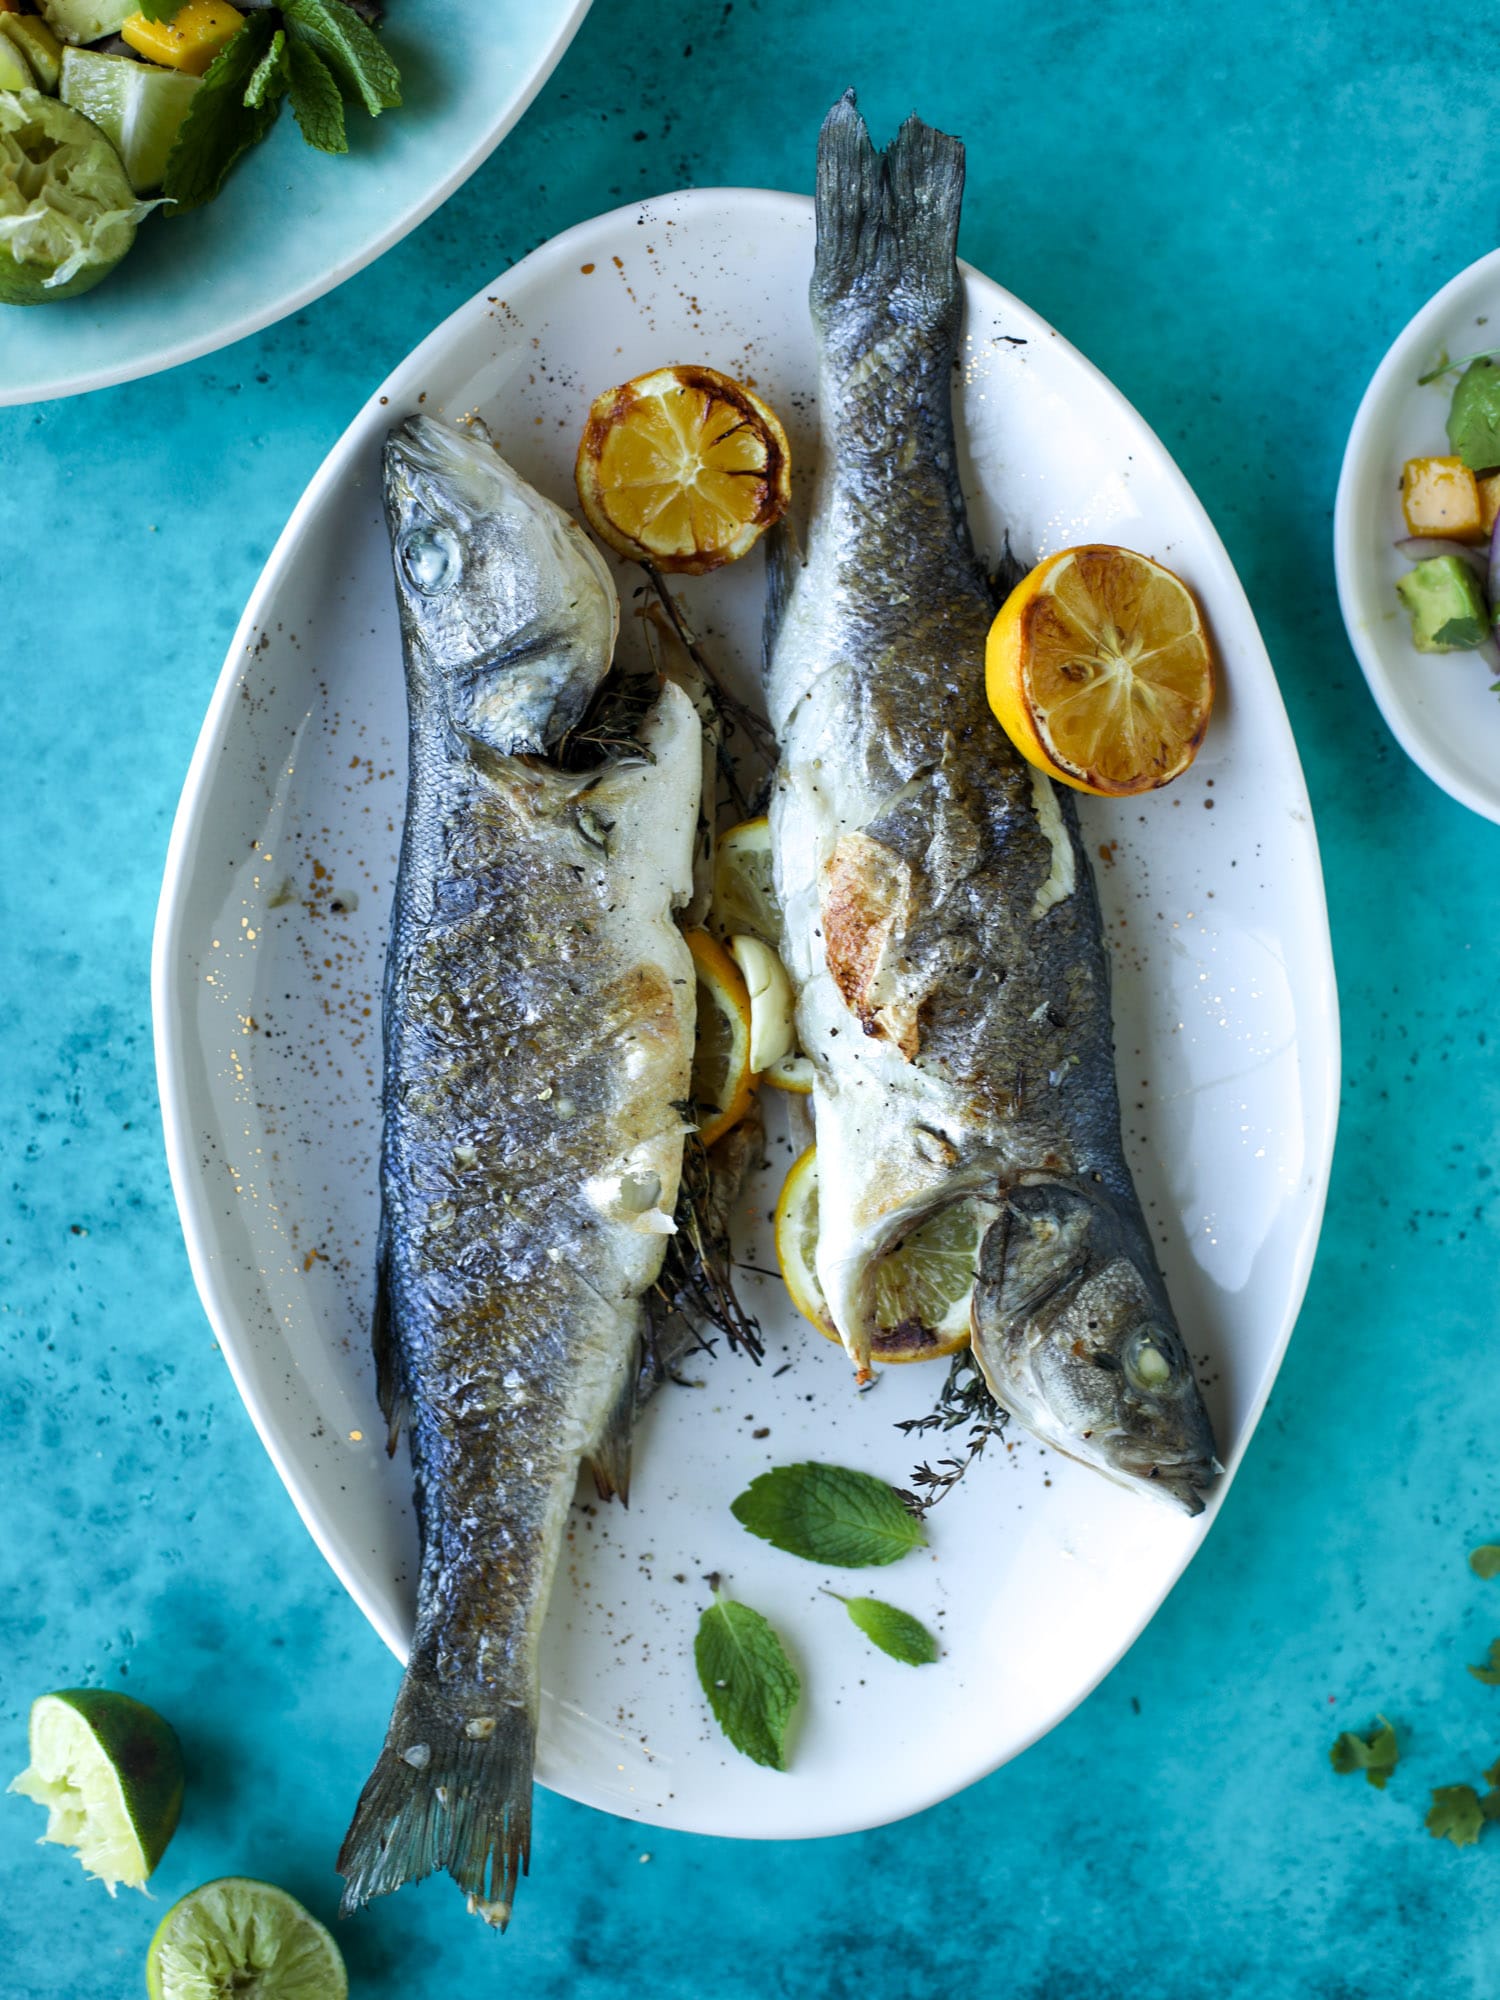 Grilled whole fish is easier than it looks! Try this recipe for the butteriest, most flavorful grilled branzino paired with an avocado mango salad.